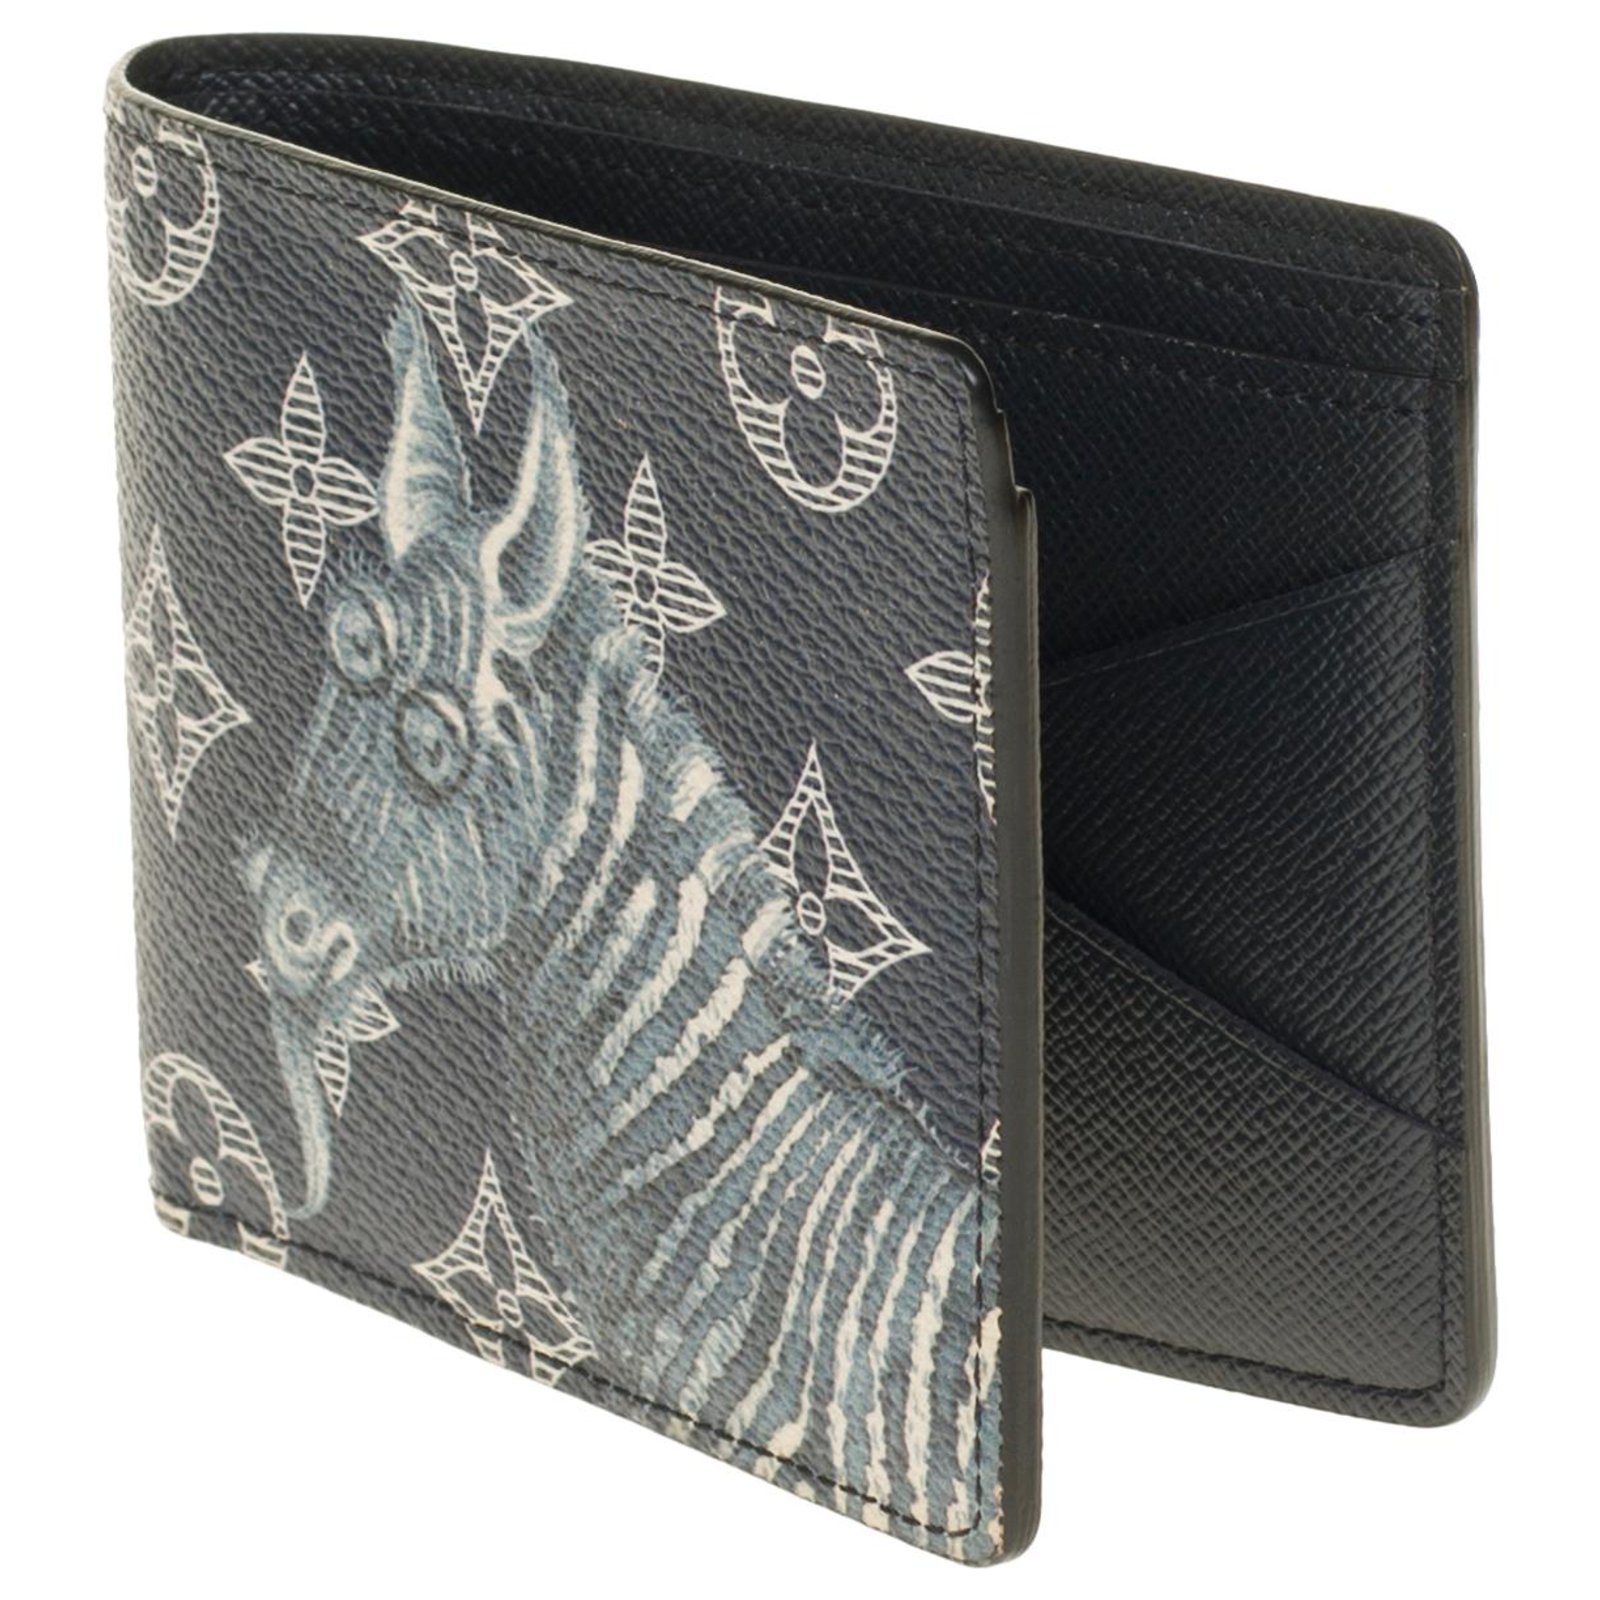 Brand new- Ultra limited Chapman Brothers Zebra Wallet in black and white